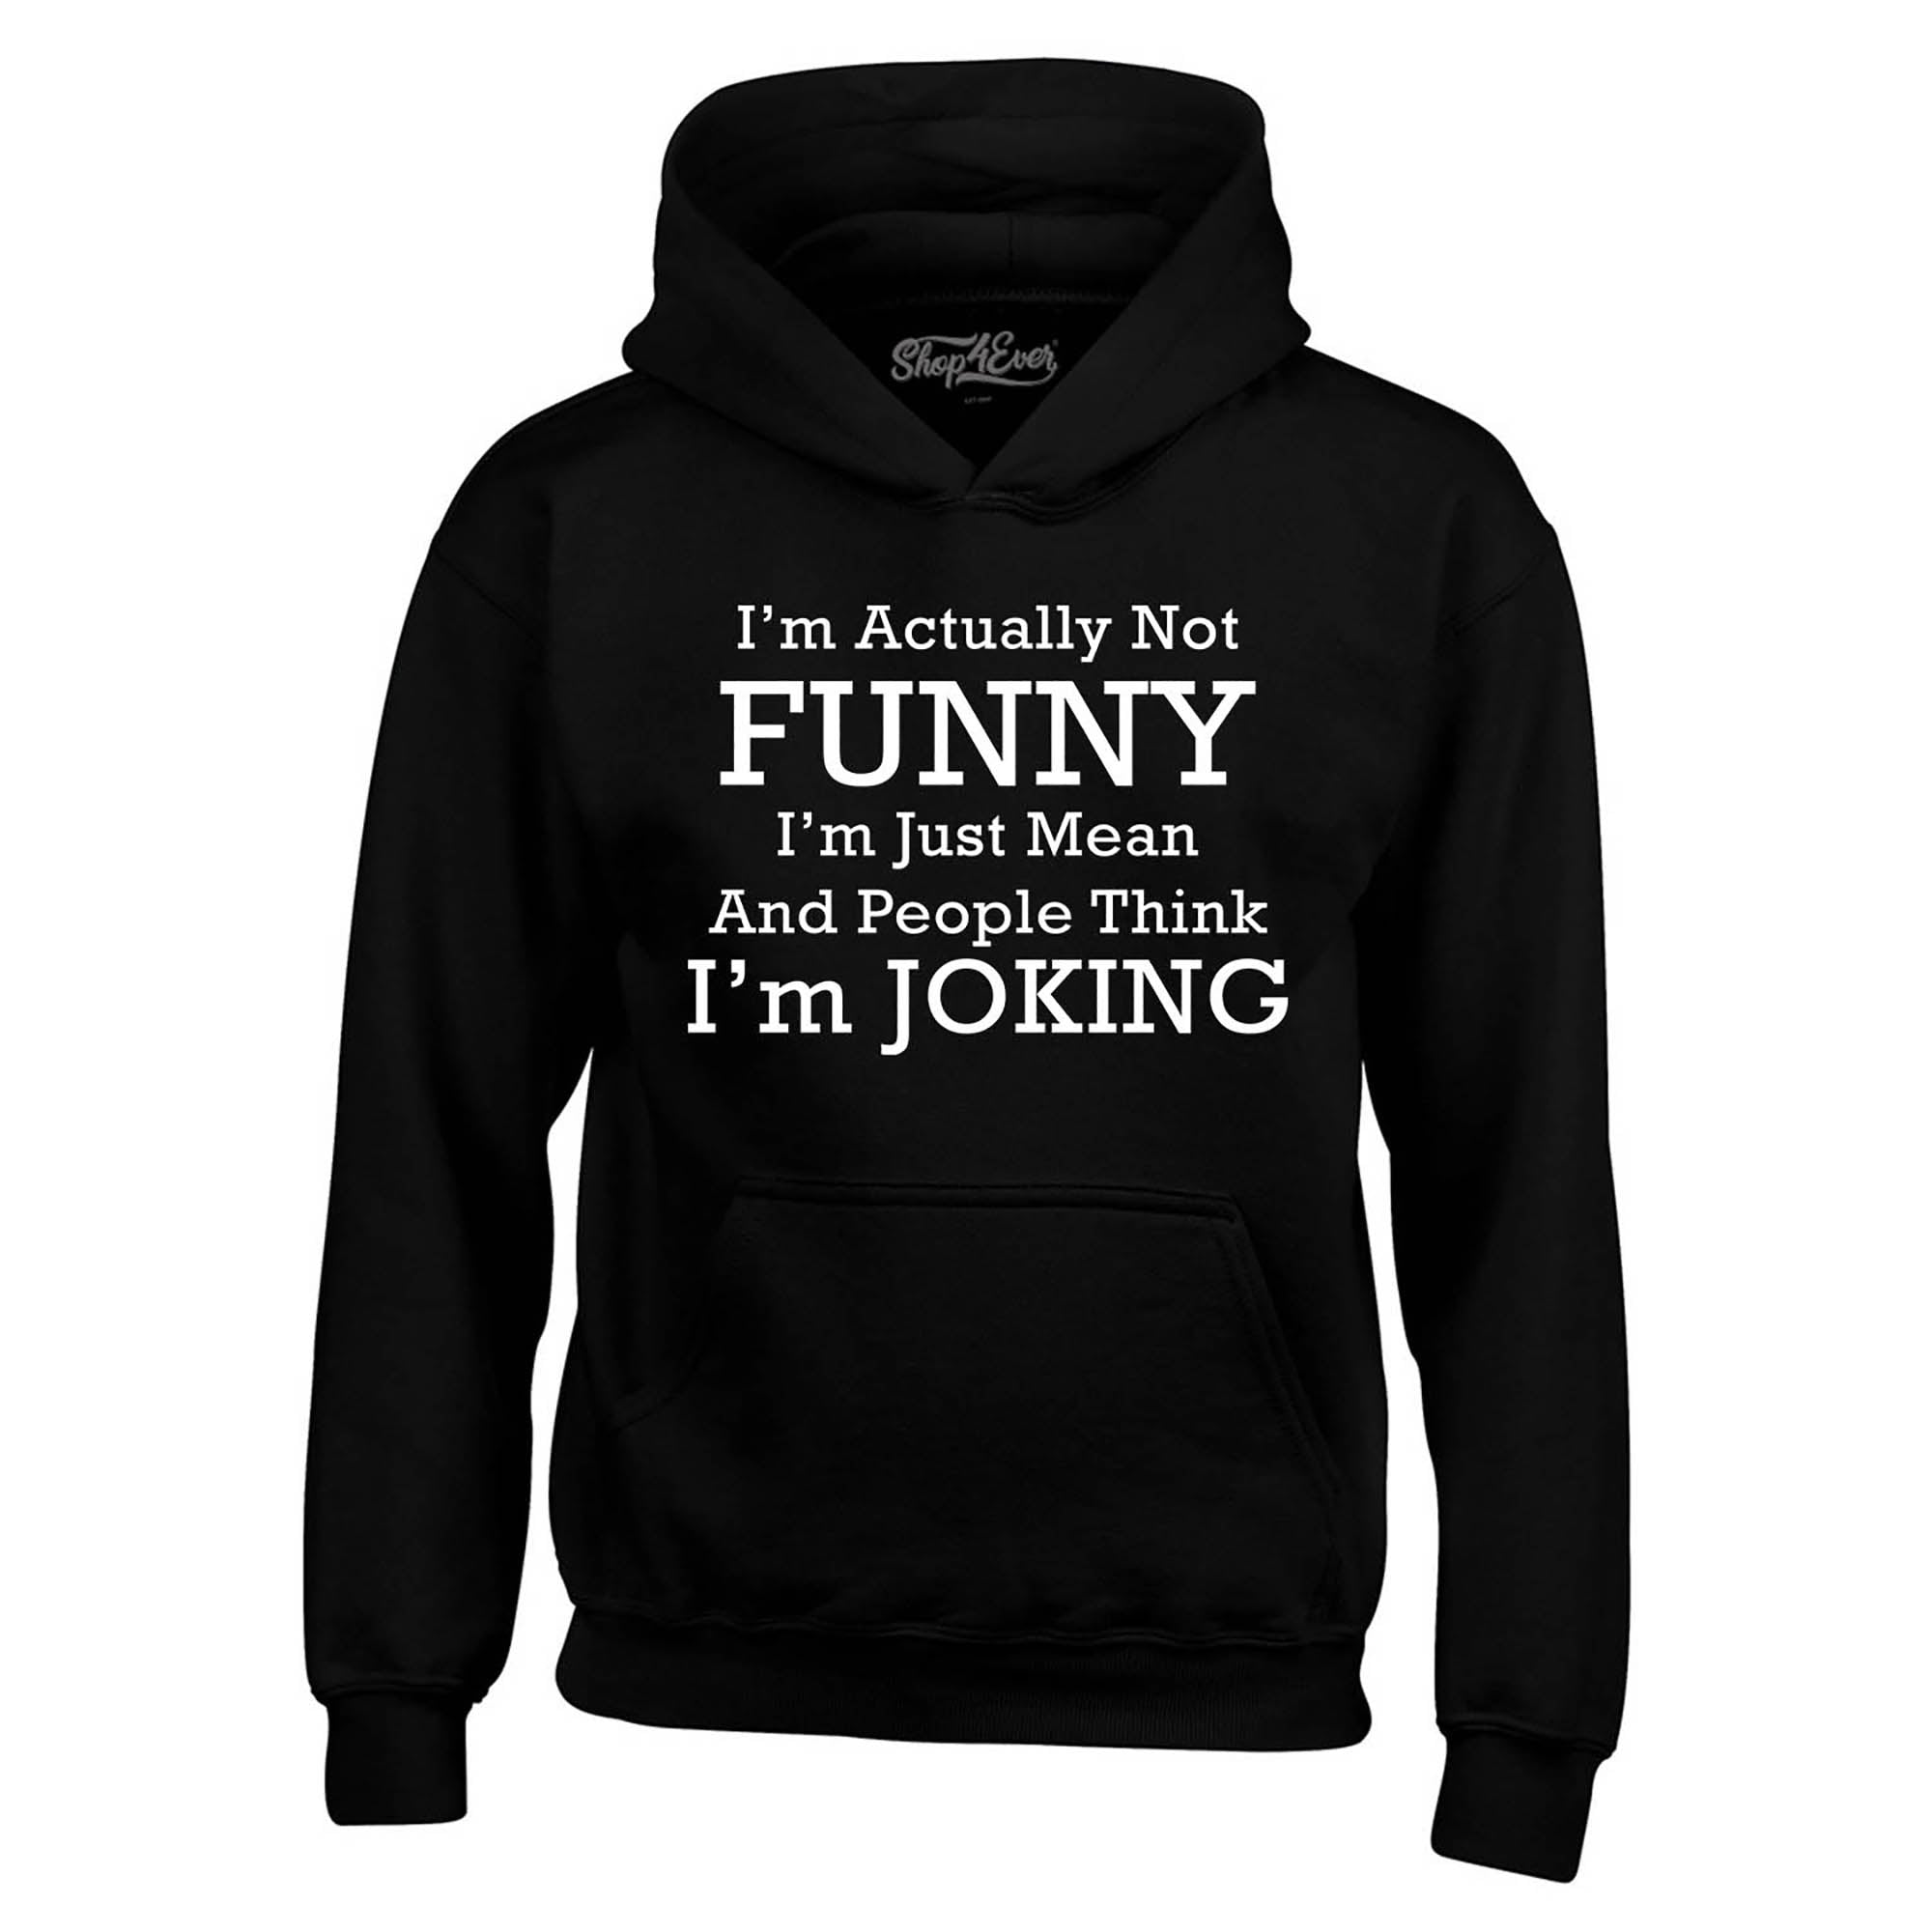 I'm Actually Not Funny I'm Just Mean Hoodie Sweatshirts